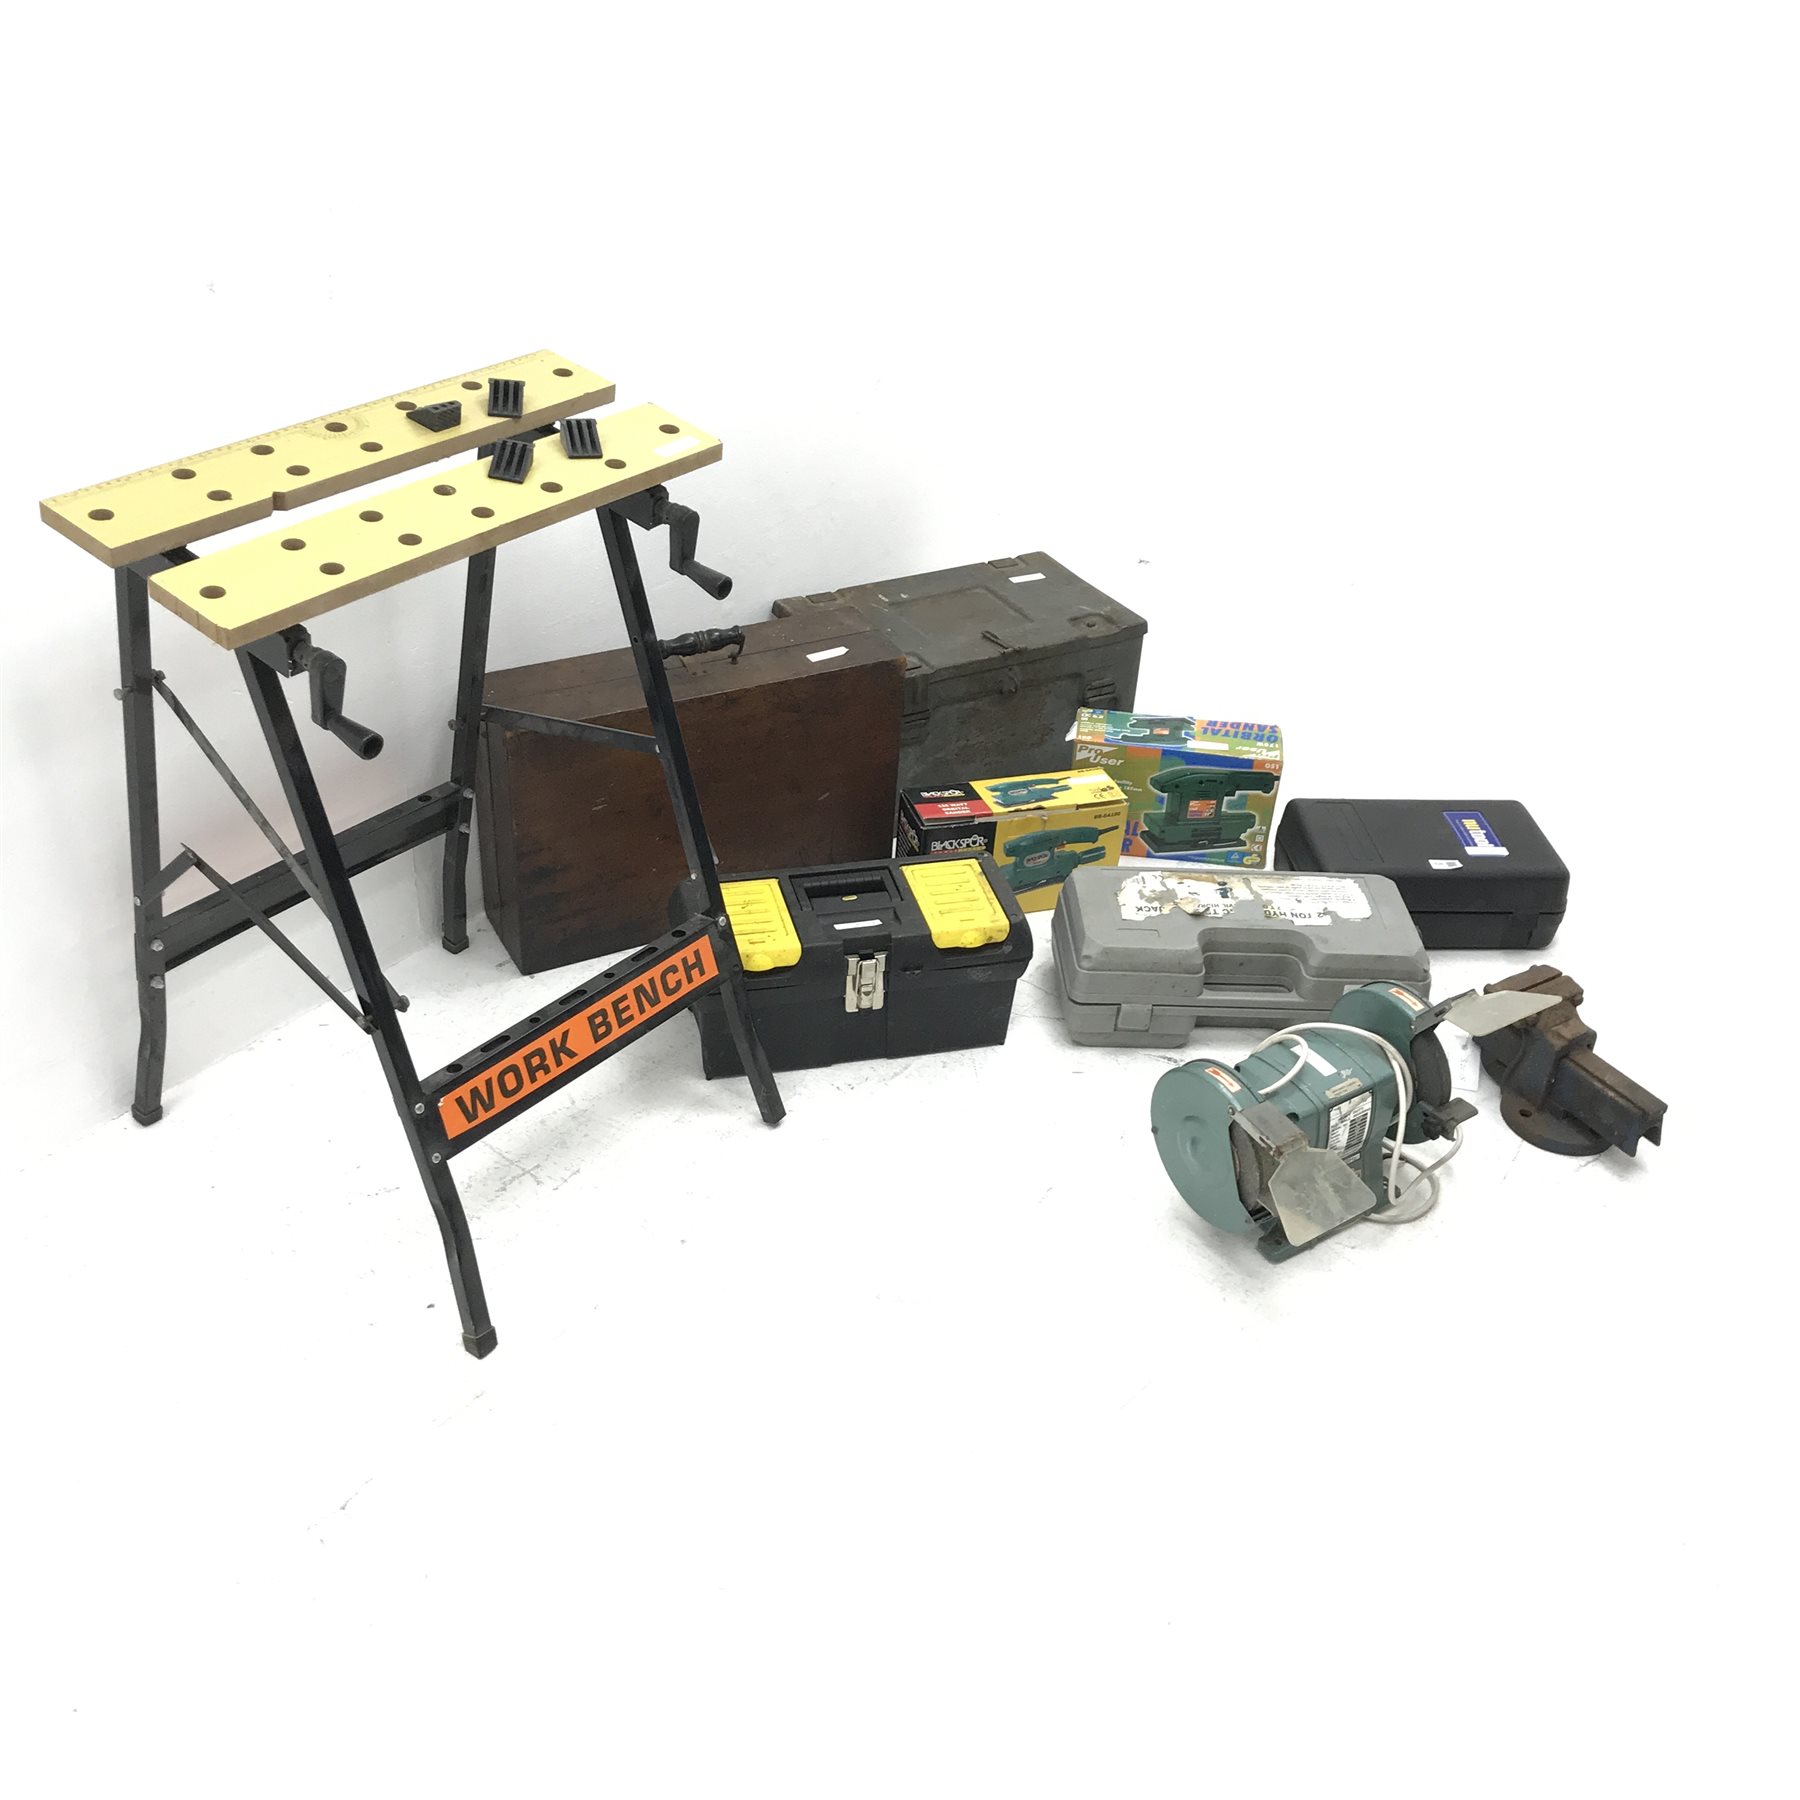 A quantity of tools including Nutool grinder, bench vice, trolley jack, folding work bench etc - Image 2 of 3